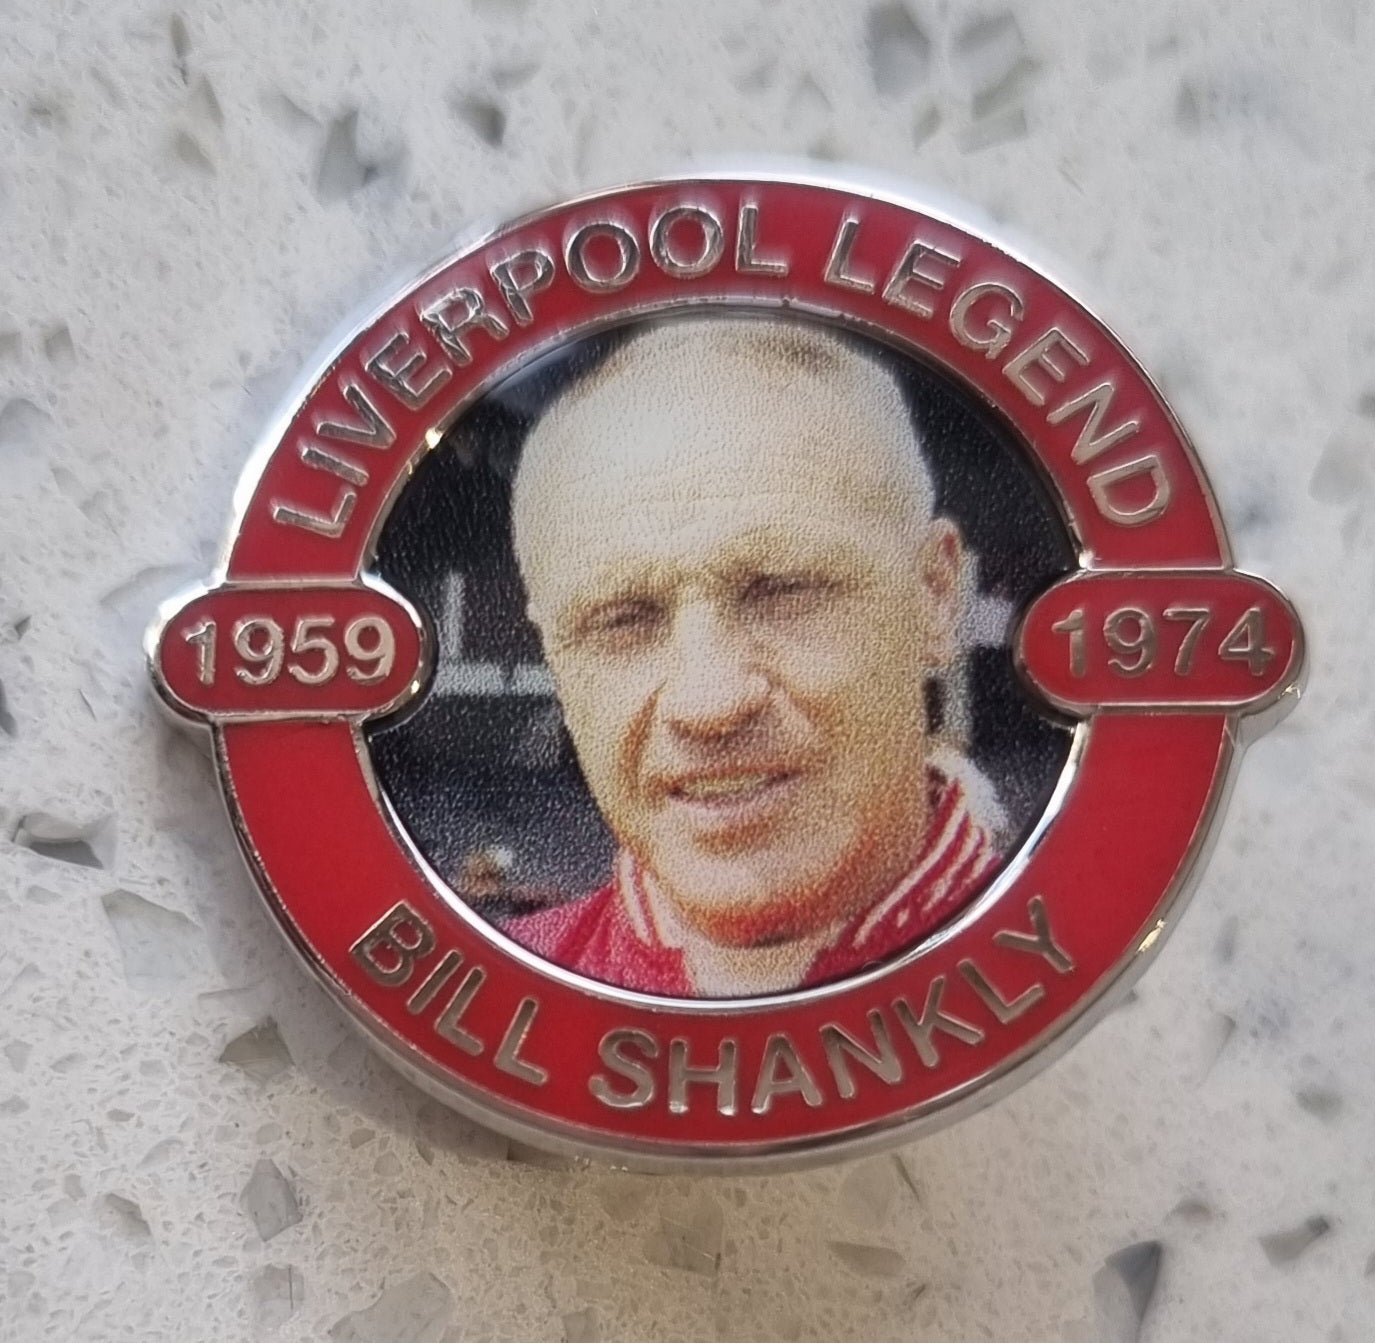 Liverpool Bill Shankly Legend Pin Badge 1959 - 1974 – Footy Souvenirs